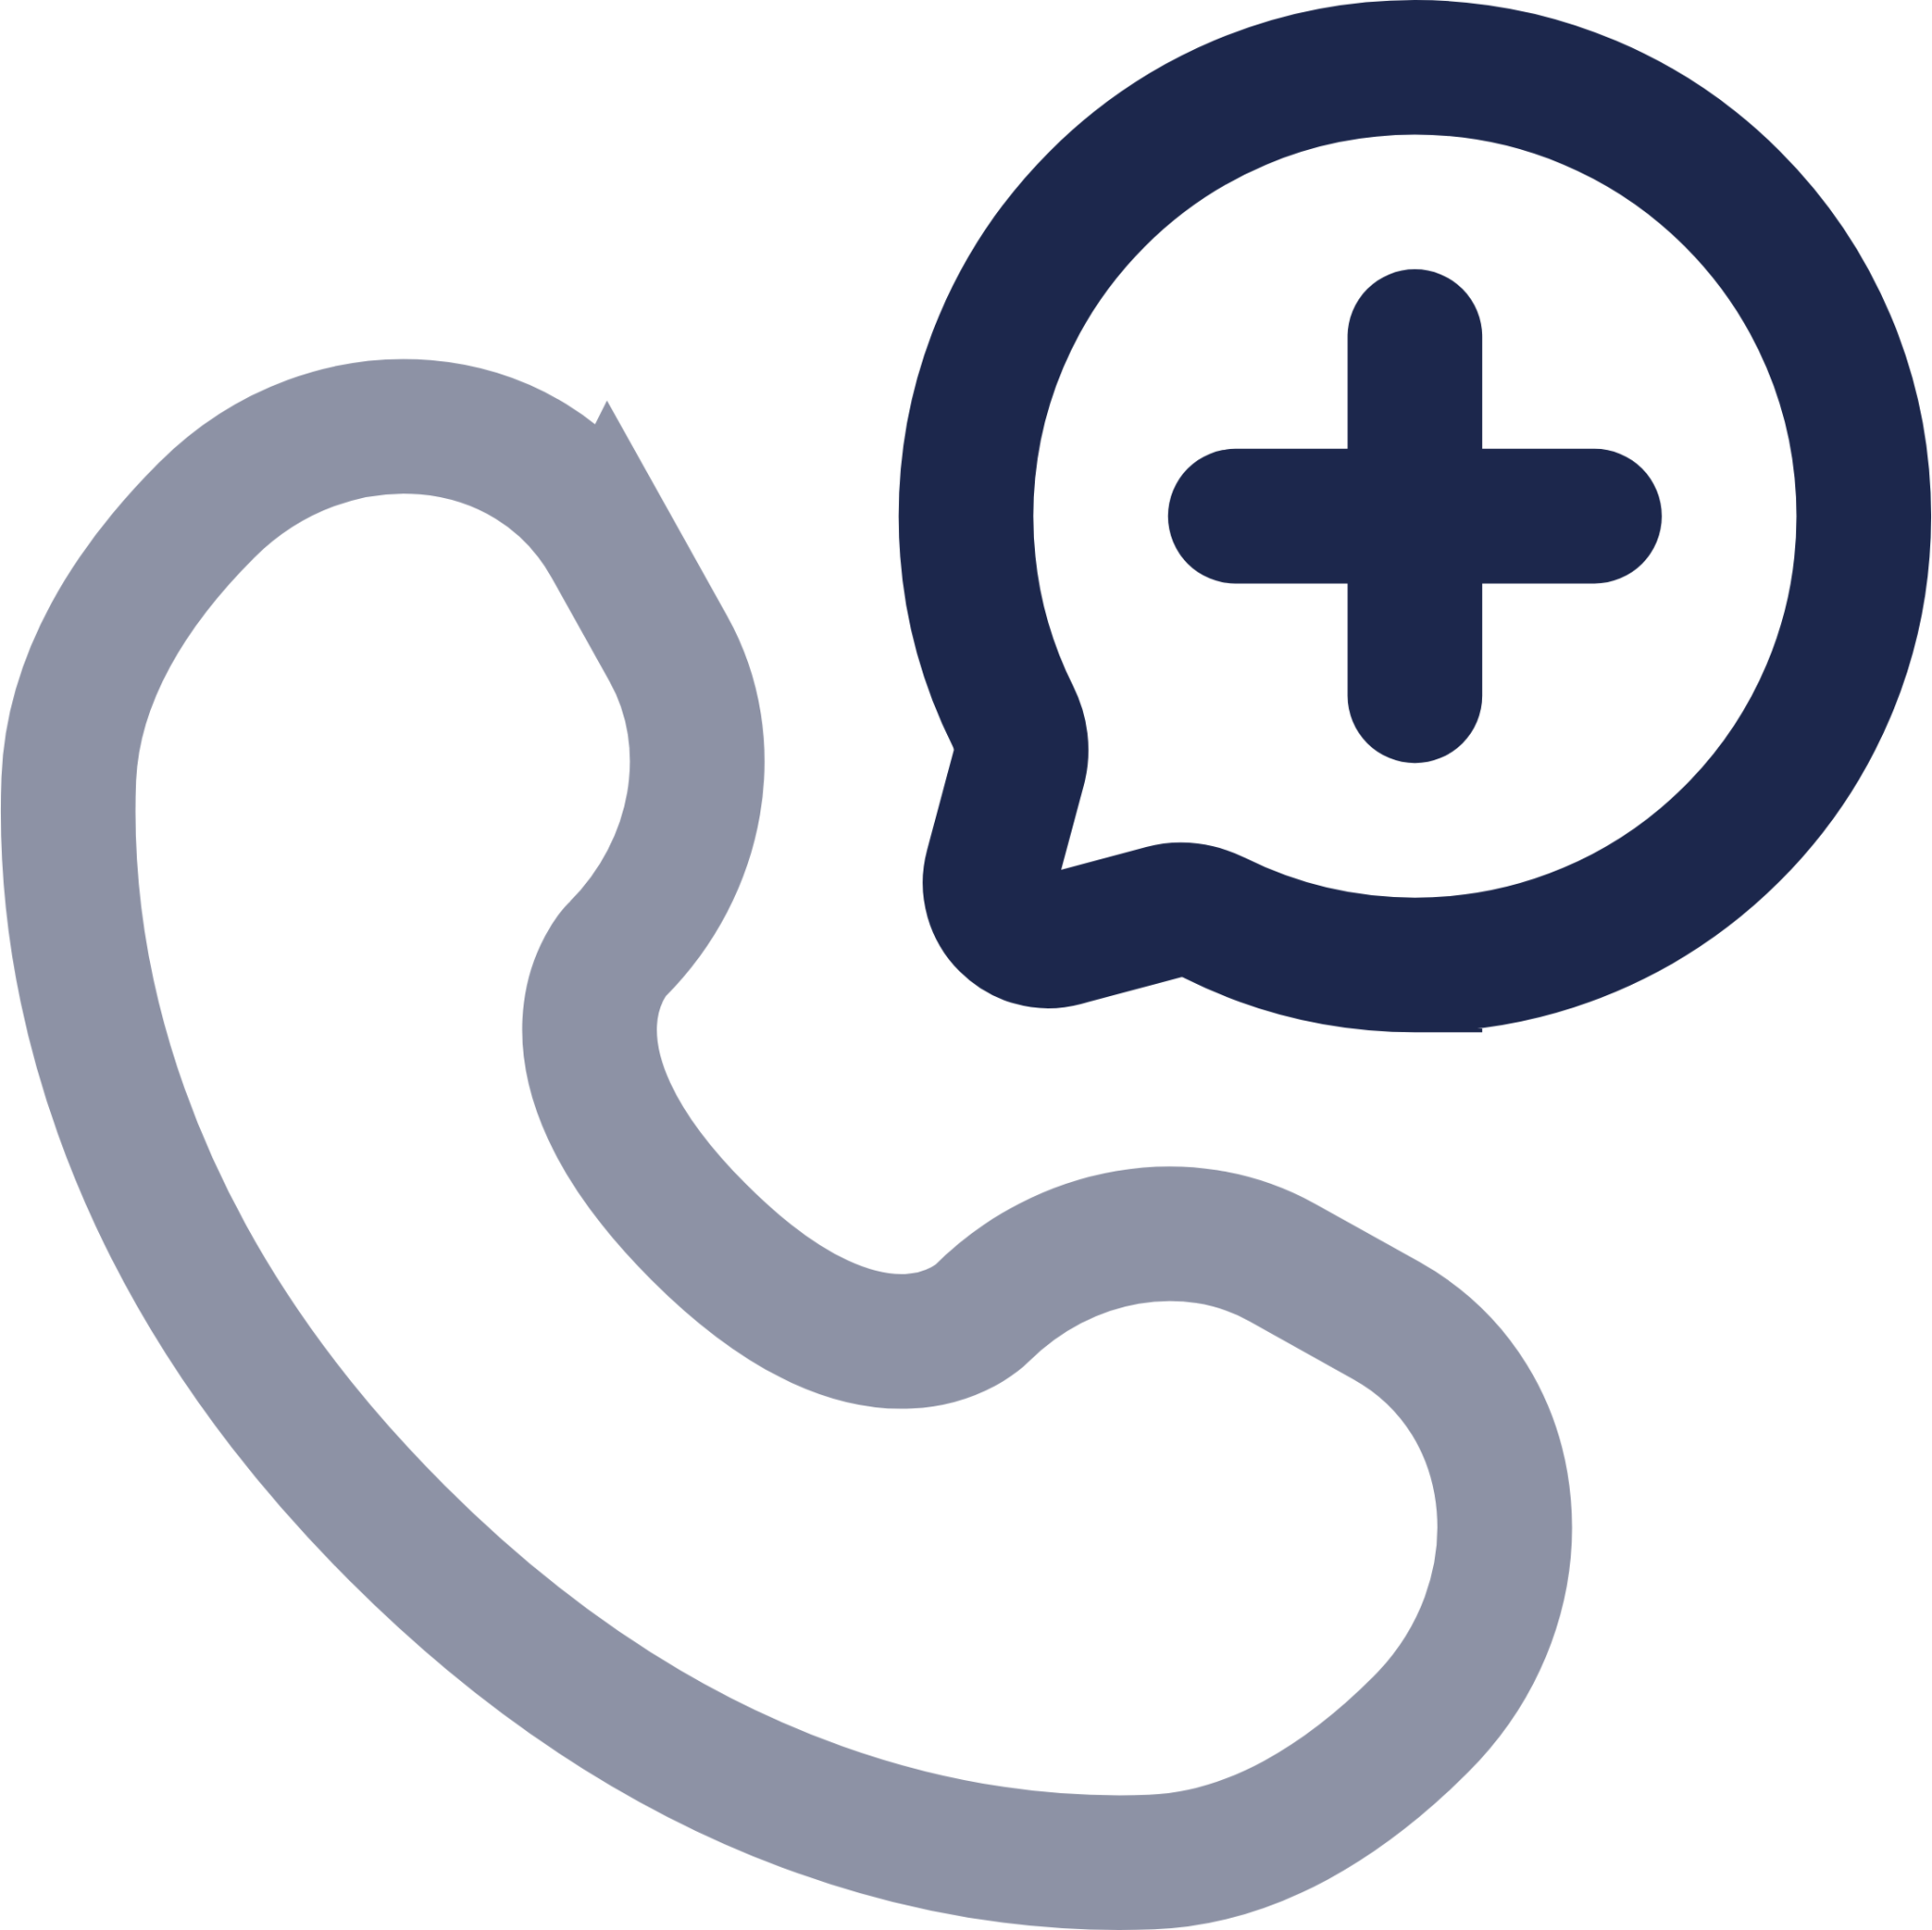 Call Medicine Rounded icon